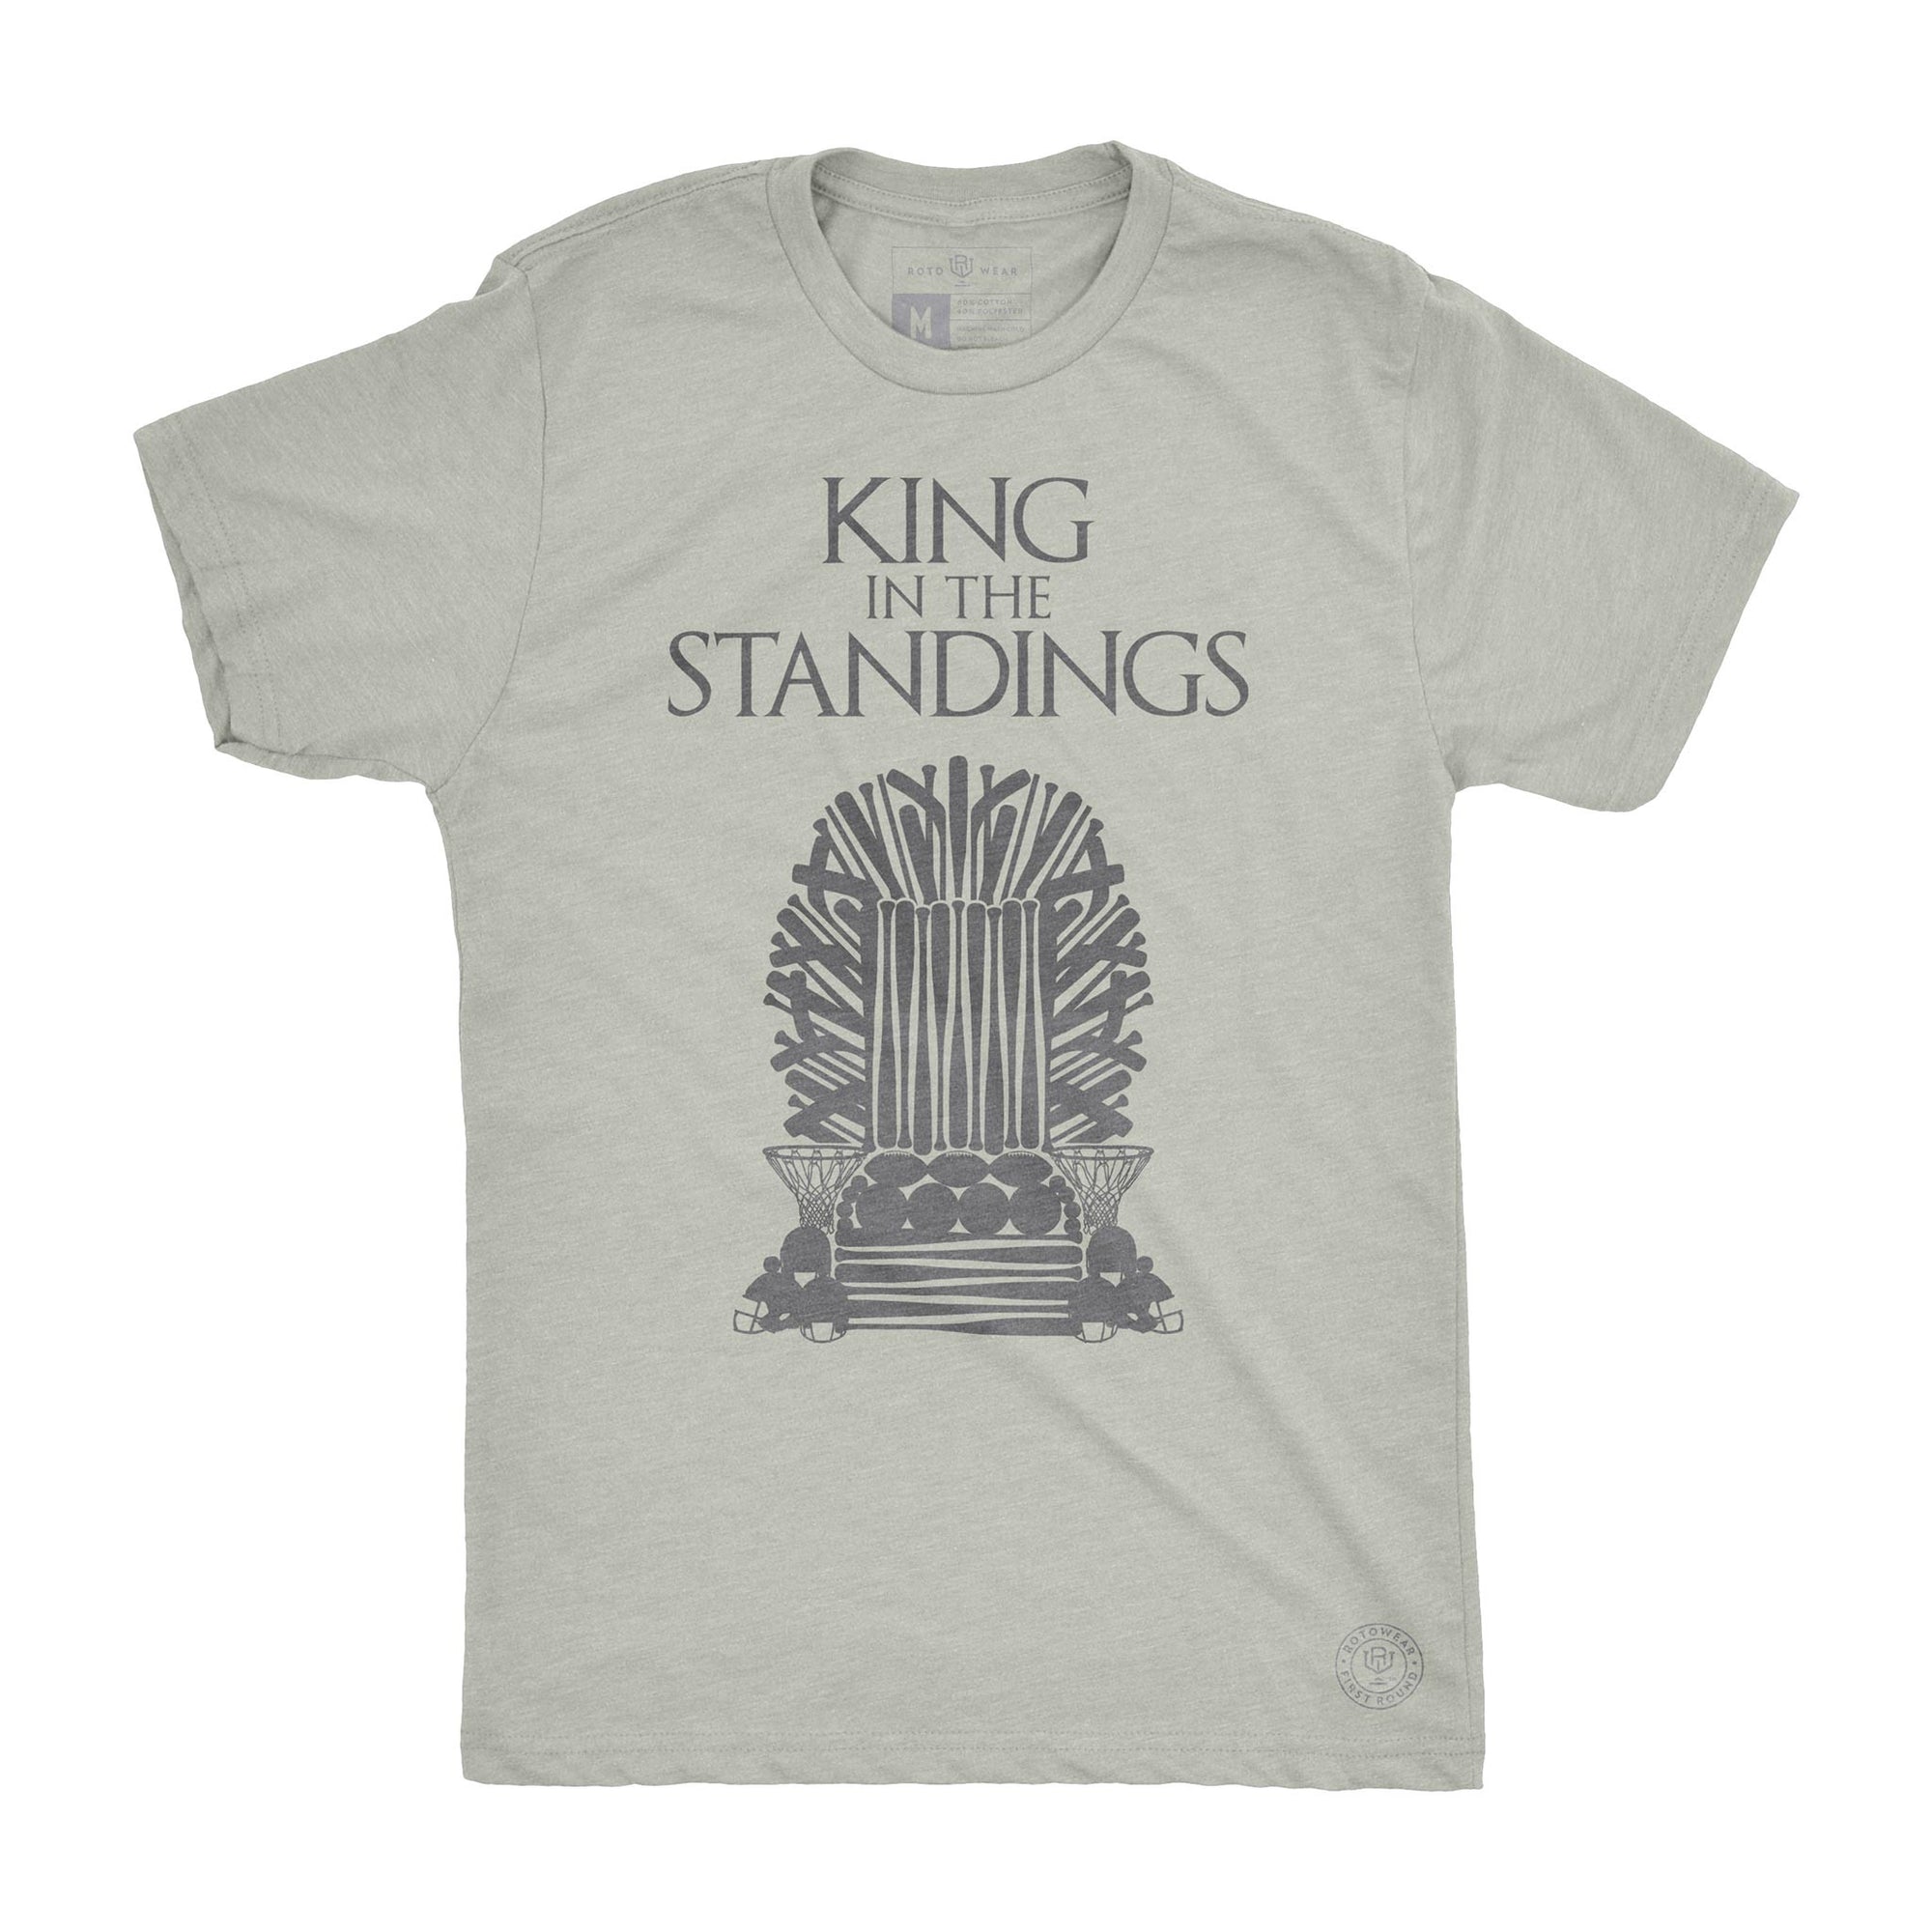 King In The Standings men’s t-shirt by RotoWear for DFS players, fantasy football, fantasy baseball, fantasy hockey and fantasy basketball managers who are Game Of Thrones fans